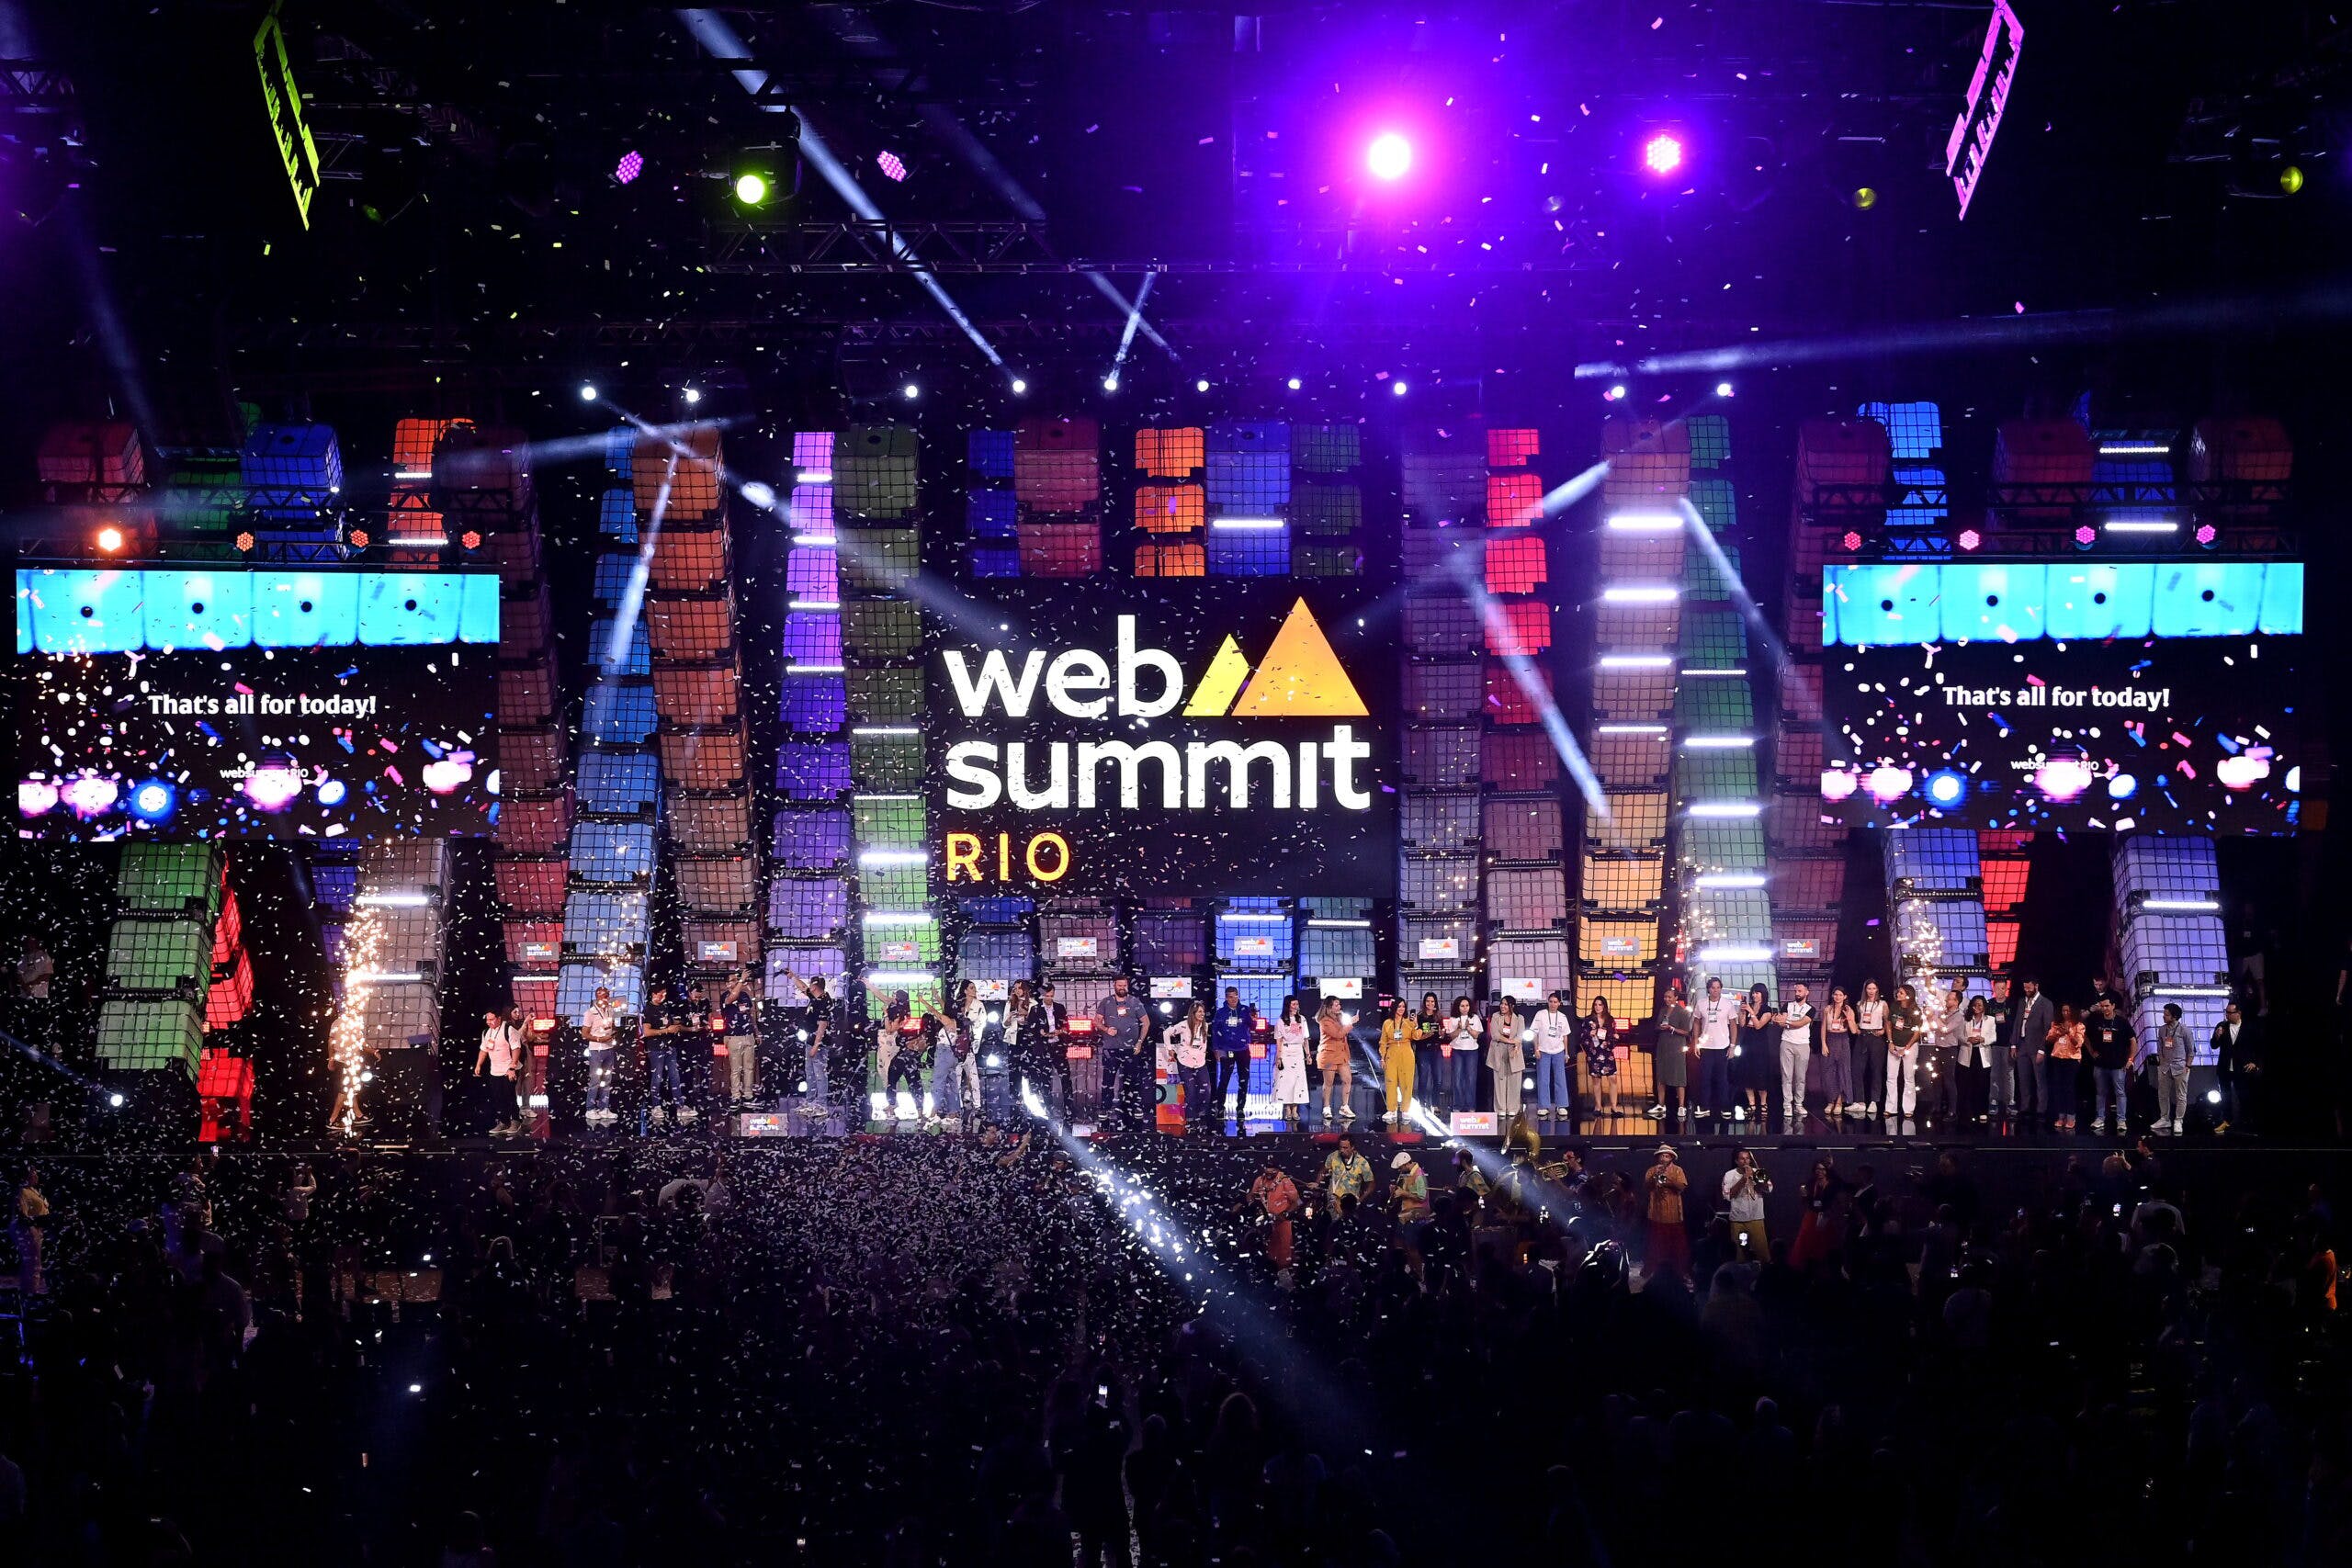 A large stage viewed from a distance over the silhouetted heads of the audience. A long line of people stands on stage, facing the audience. In front of the stage, a group of musicians – including drums, trombones, trumpets, and a sousaphone – appear to be playing. The air is filled with confetti. A large Web Summit Rio logo hangs over the heads of the people on stage. Two large screens on either side of the logo bear the message 'That's all for today!'.